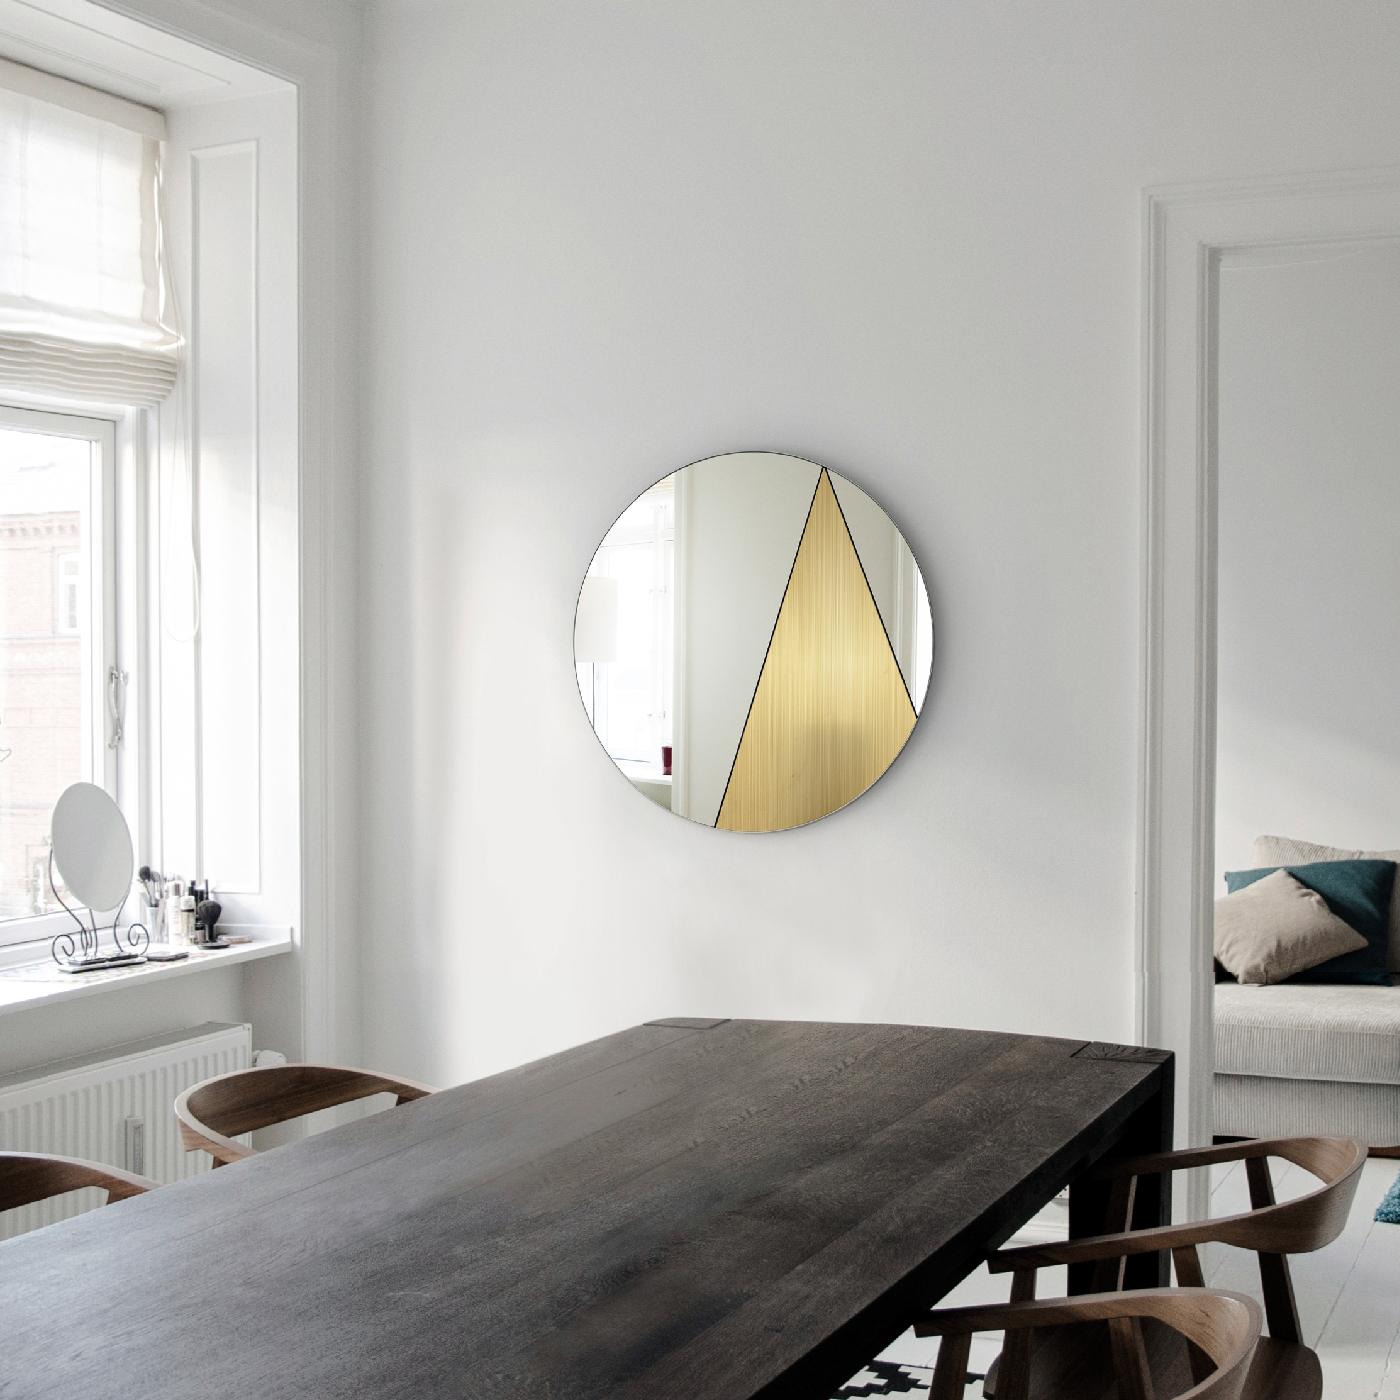 Mirrored surfaces and metals come together to reveal an abstract decoration enclosed in the round Silhouette of this stunning, handmade mirror from the Res Collection. Functional yet intriguing, this piece will make a statement in a contemporary